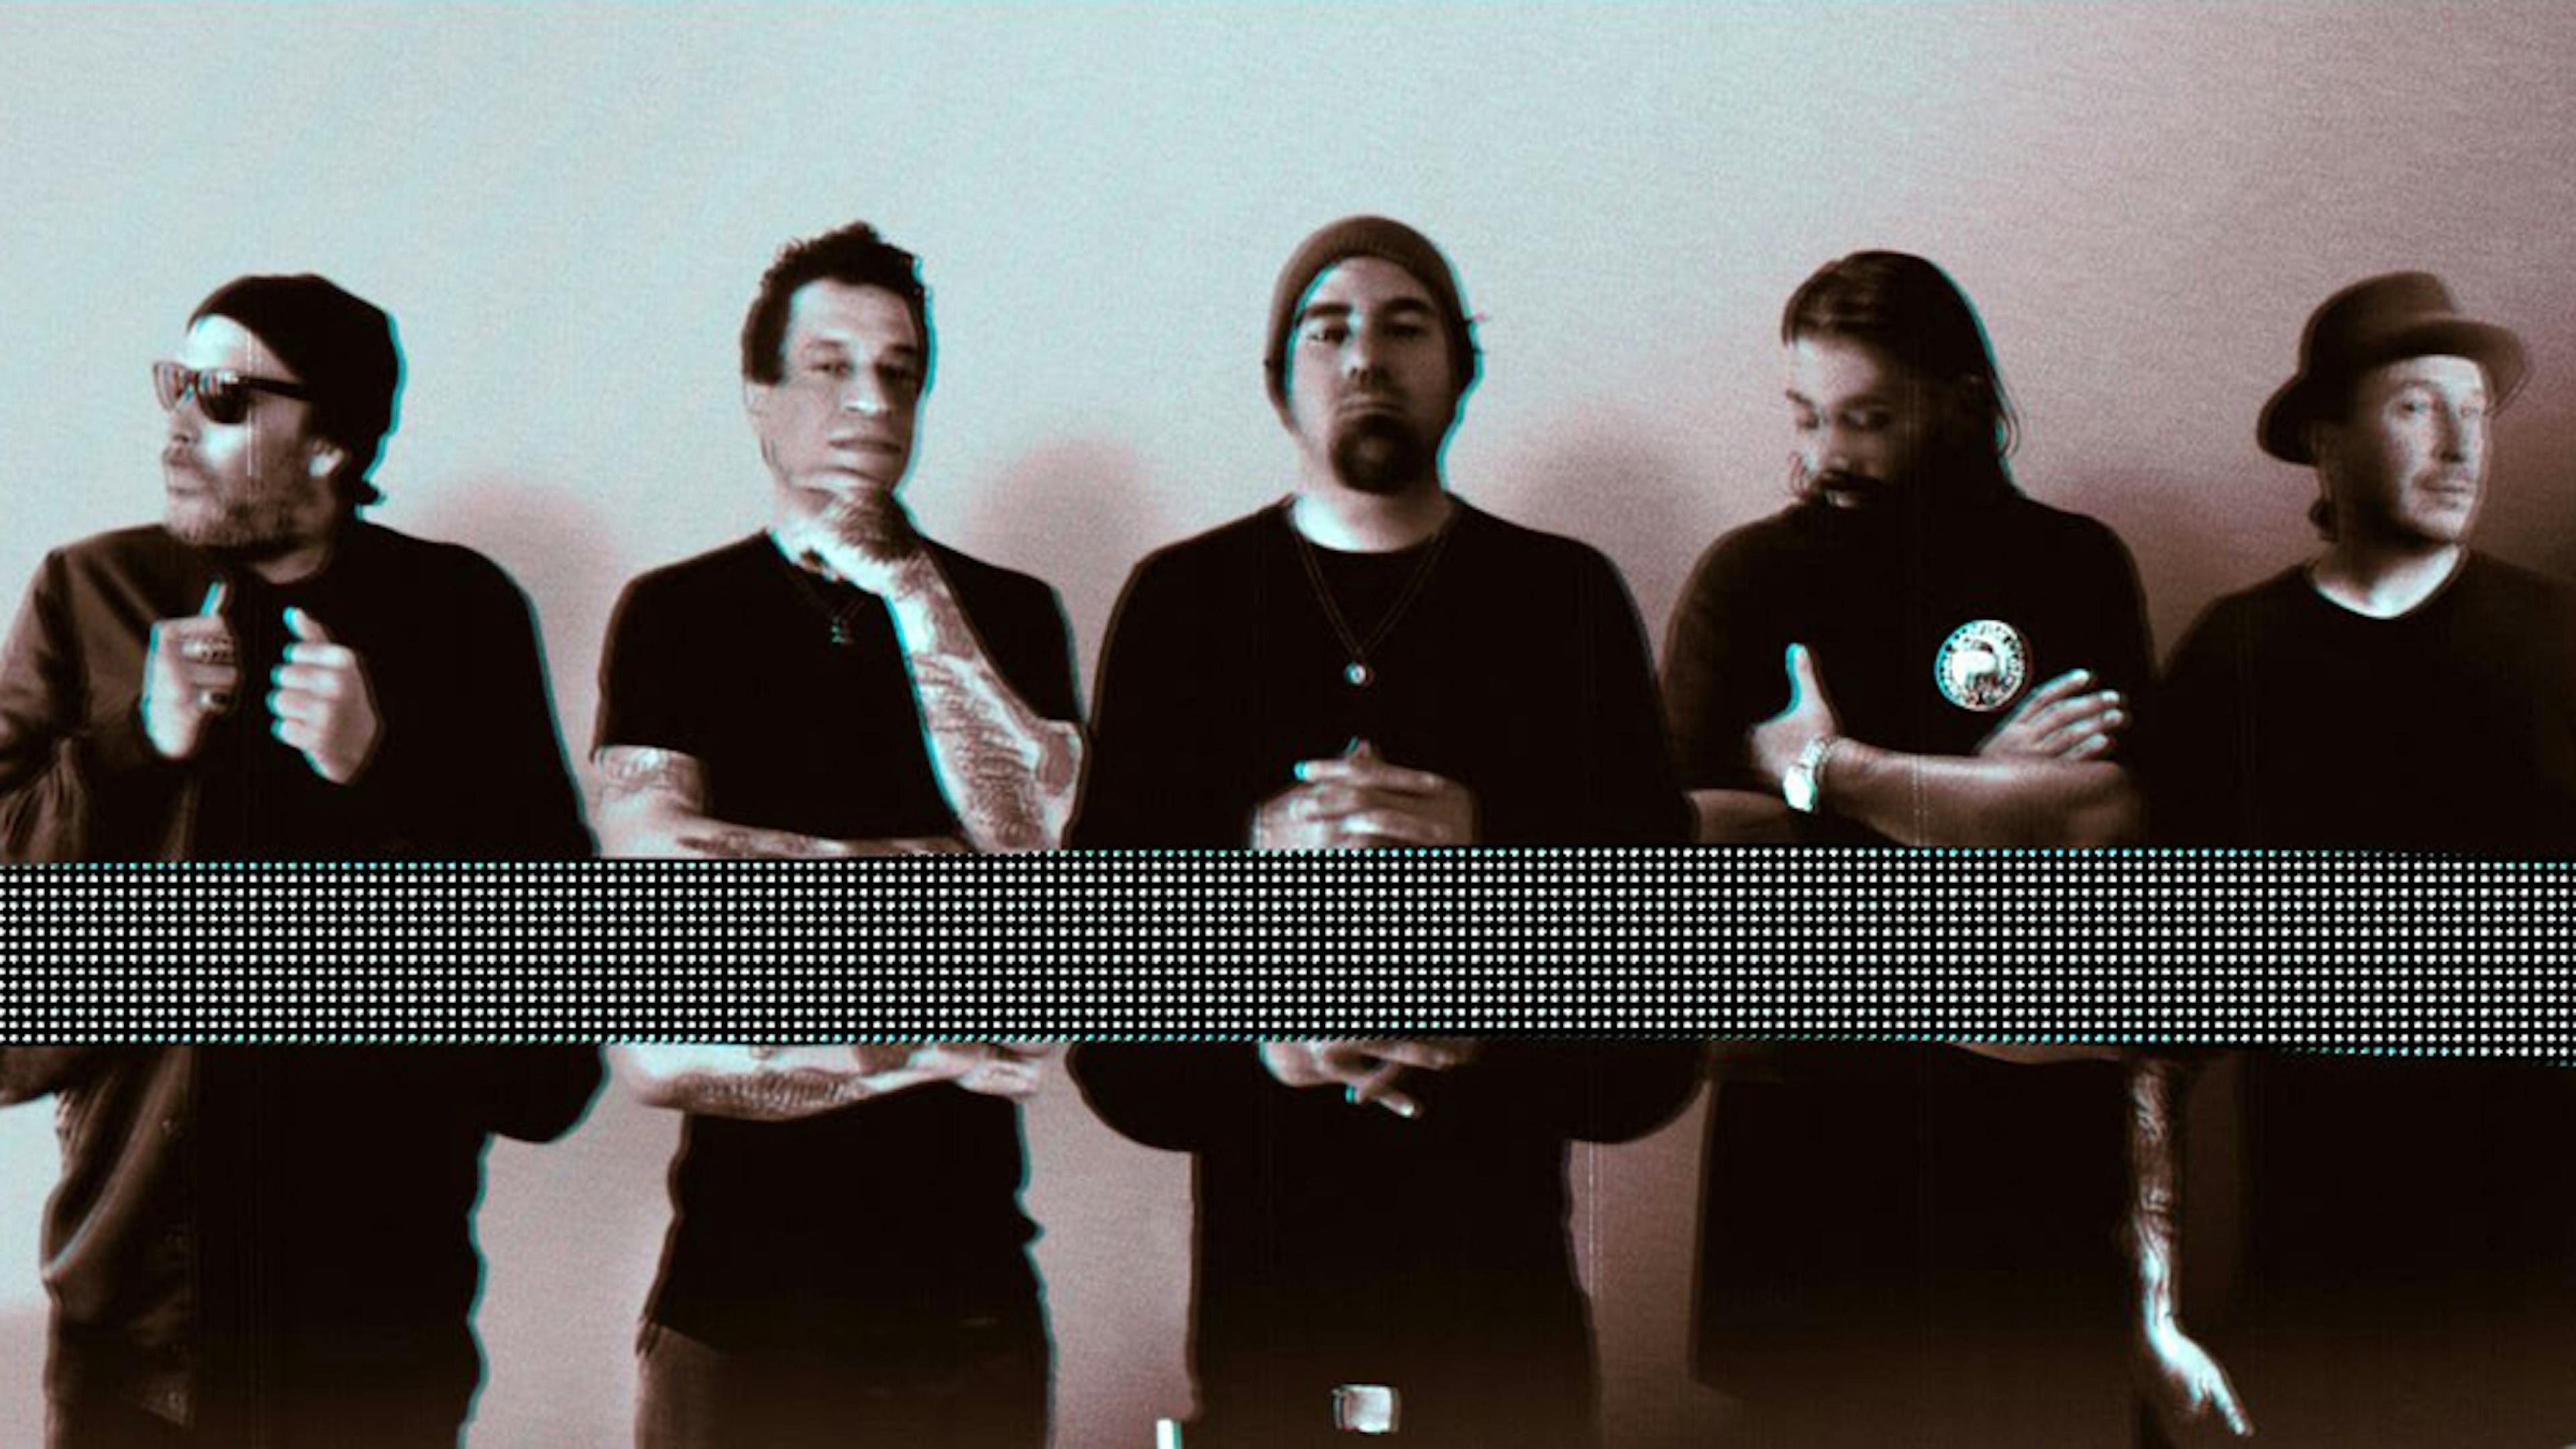 Chino Moreno: The Members Of Deftones Are "Firing On All Cylinders" On New Album Ohms